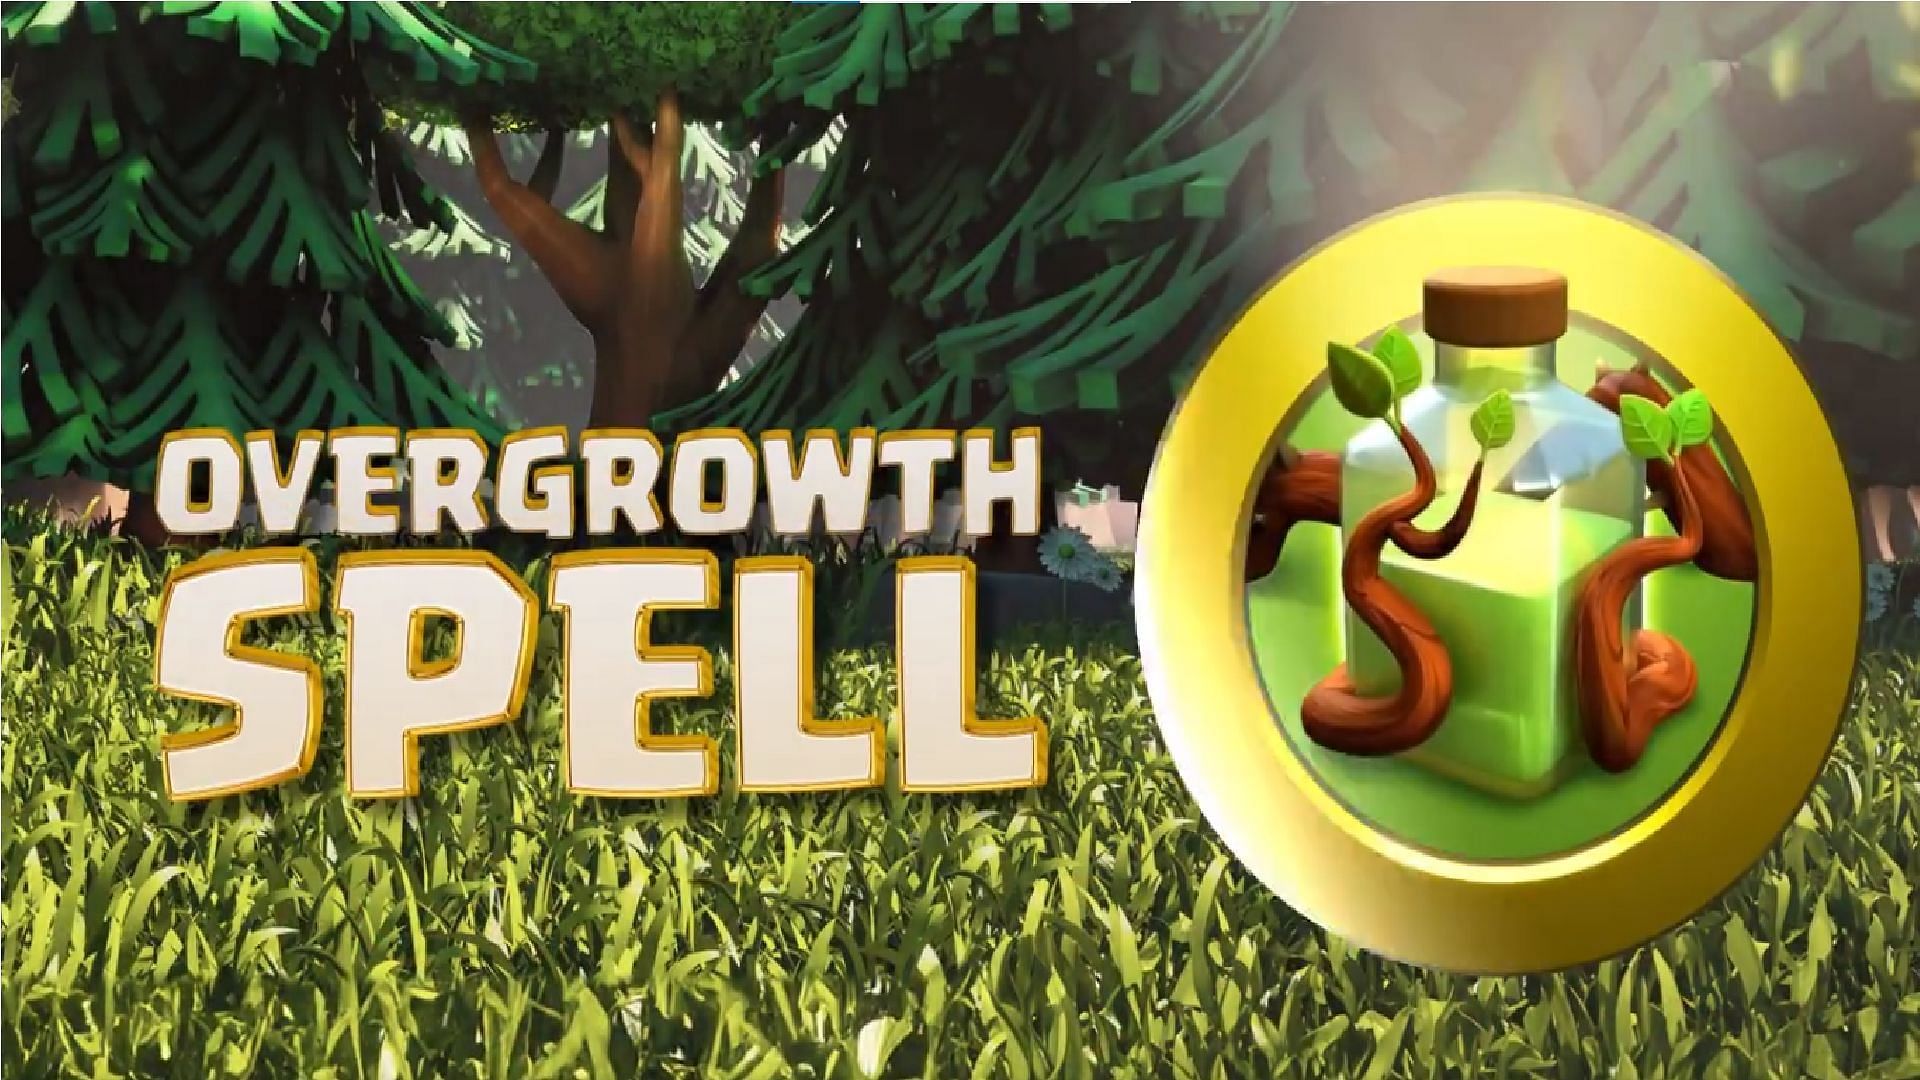 Overgrowth Spell in Clash of Clans